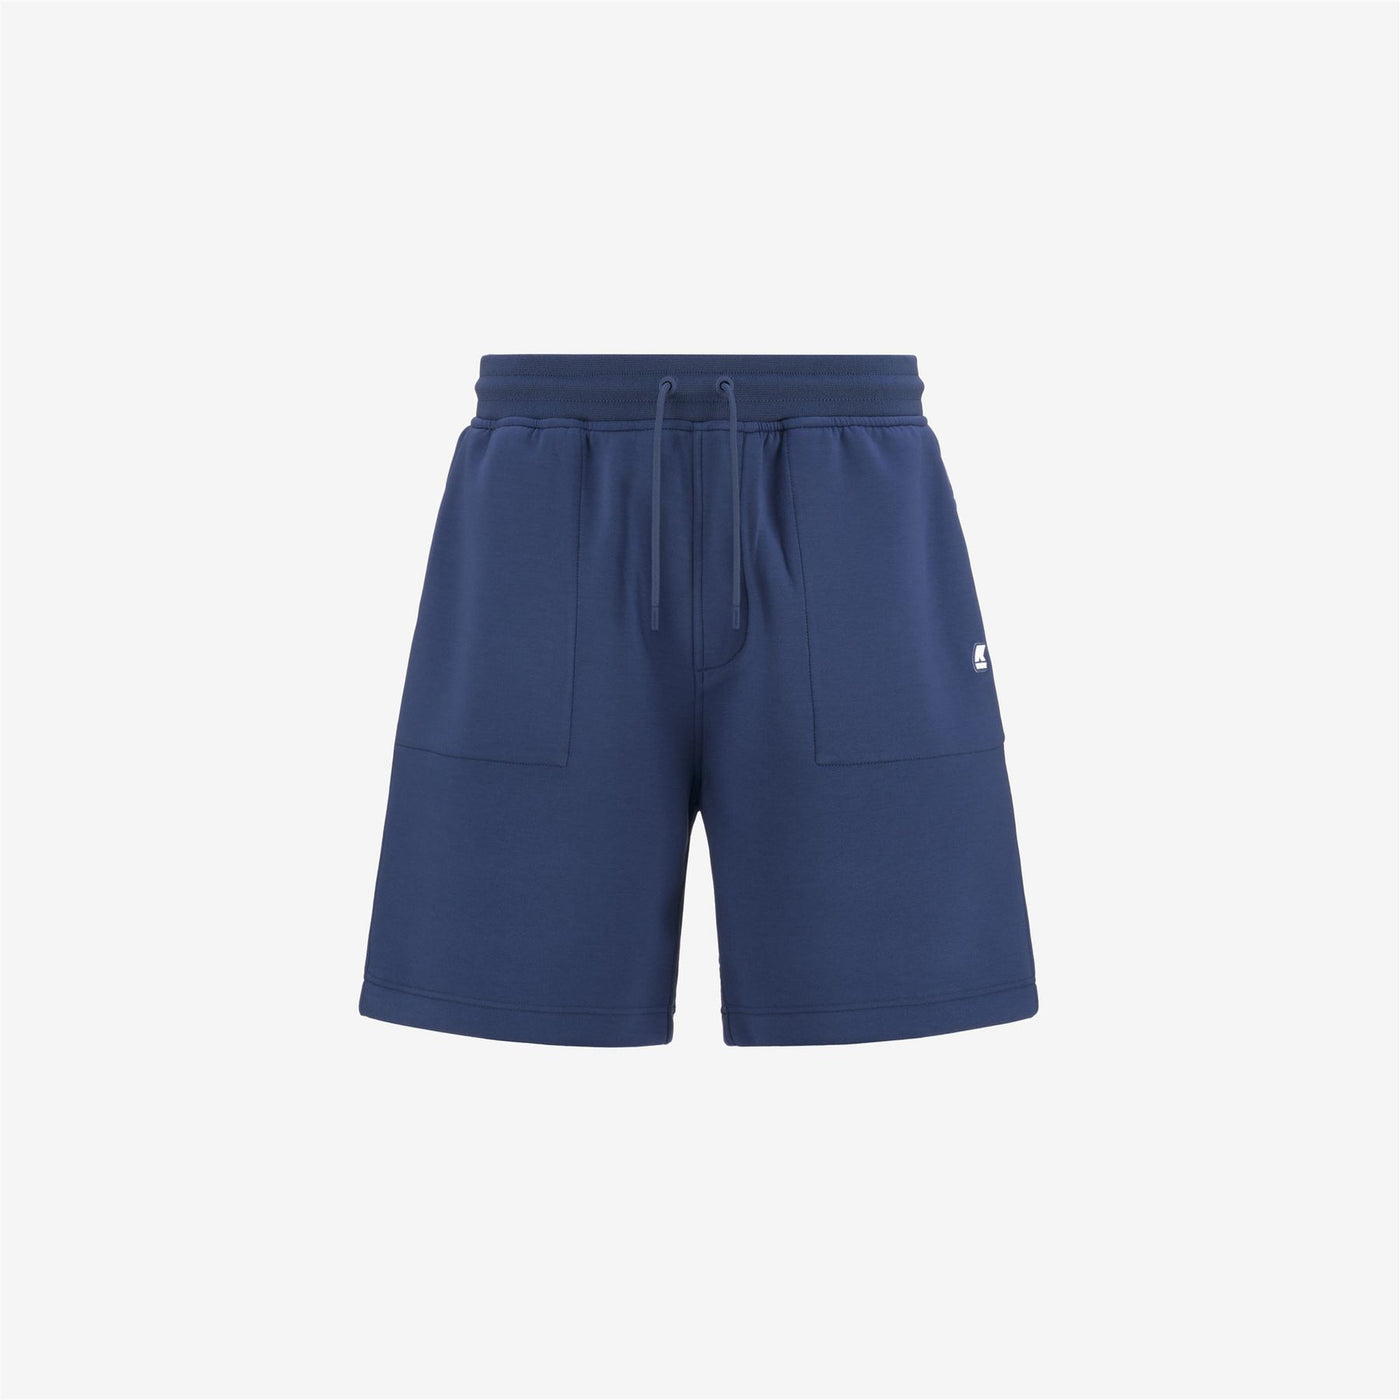 THEOTIME LIGHT SPACER - SHORTS - MAN - BLUE FIORD